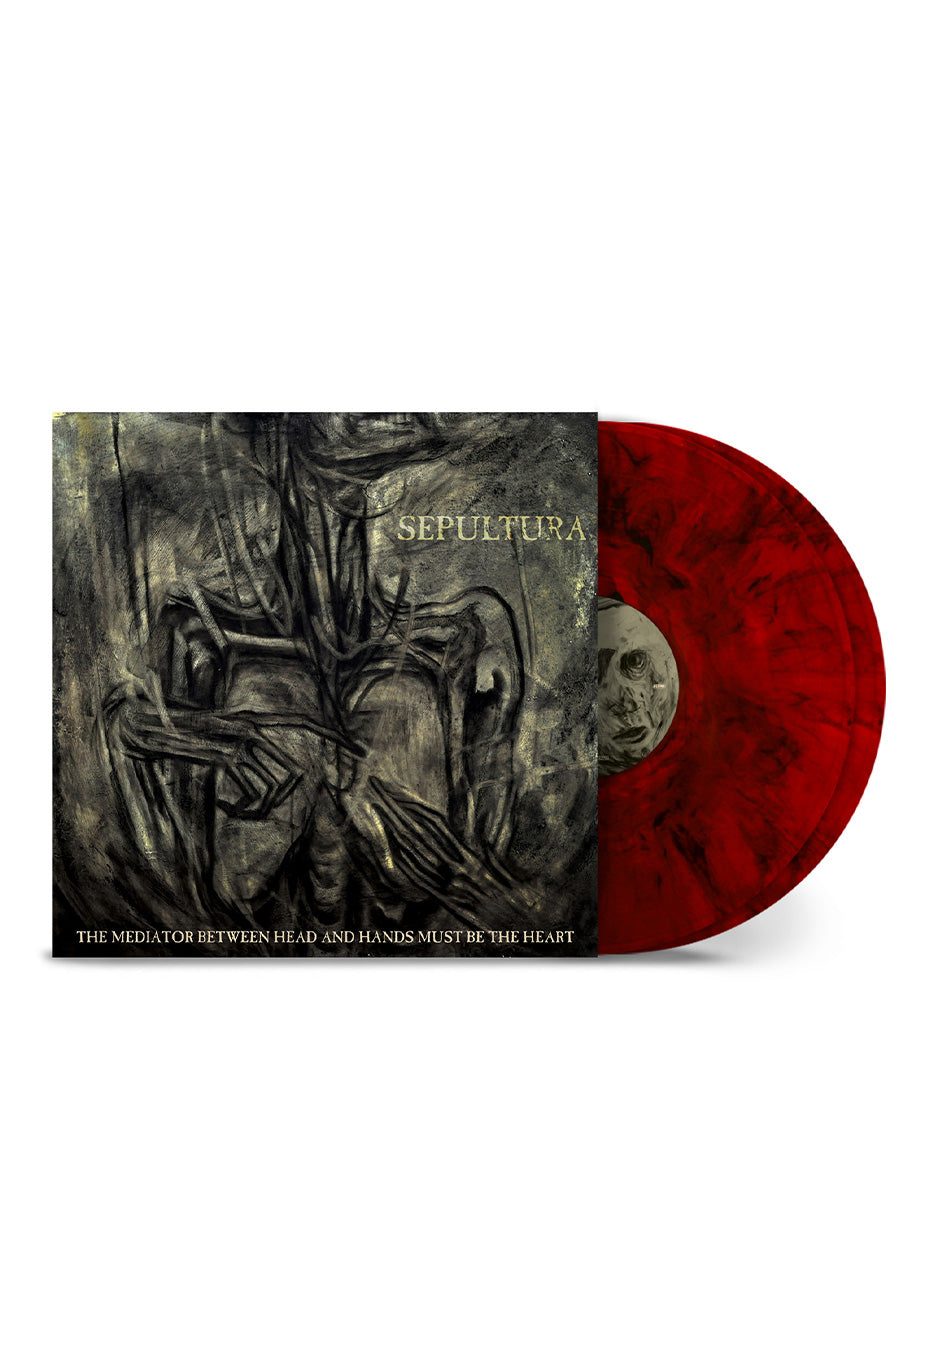 Sepultura - The Mediator Between Head And Hands Must Be The Heart (40th Anniv.) Ltd. Ruby - Marbled 2 Vinyl | Neutral-Image